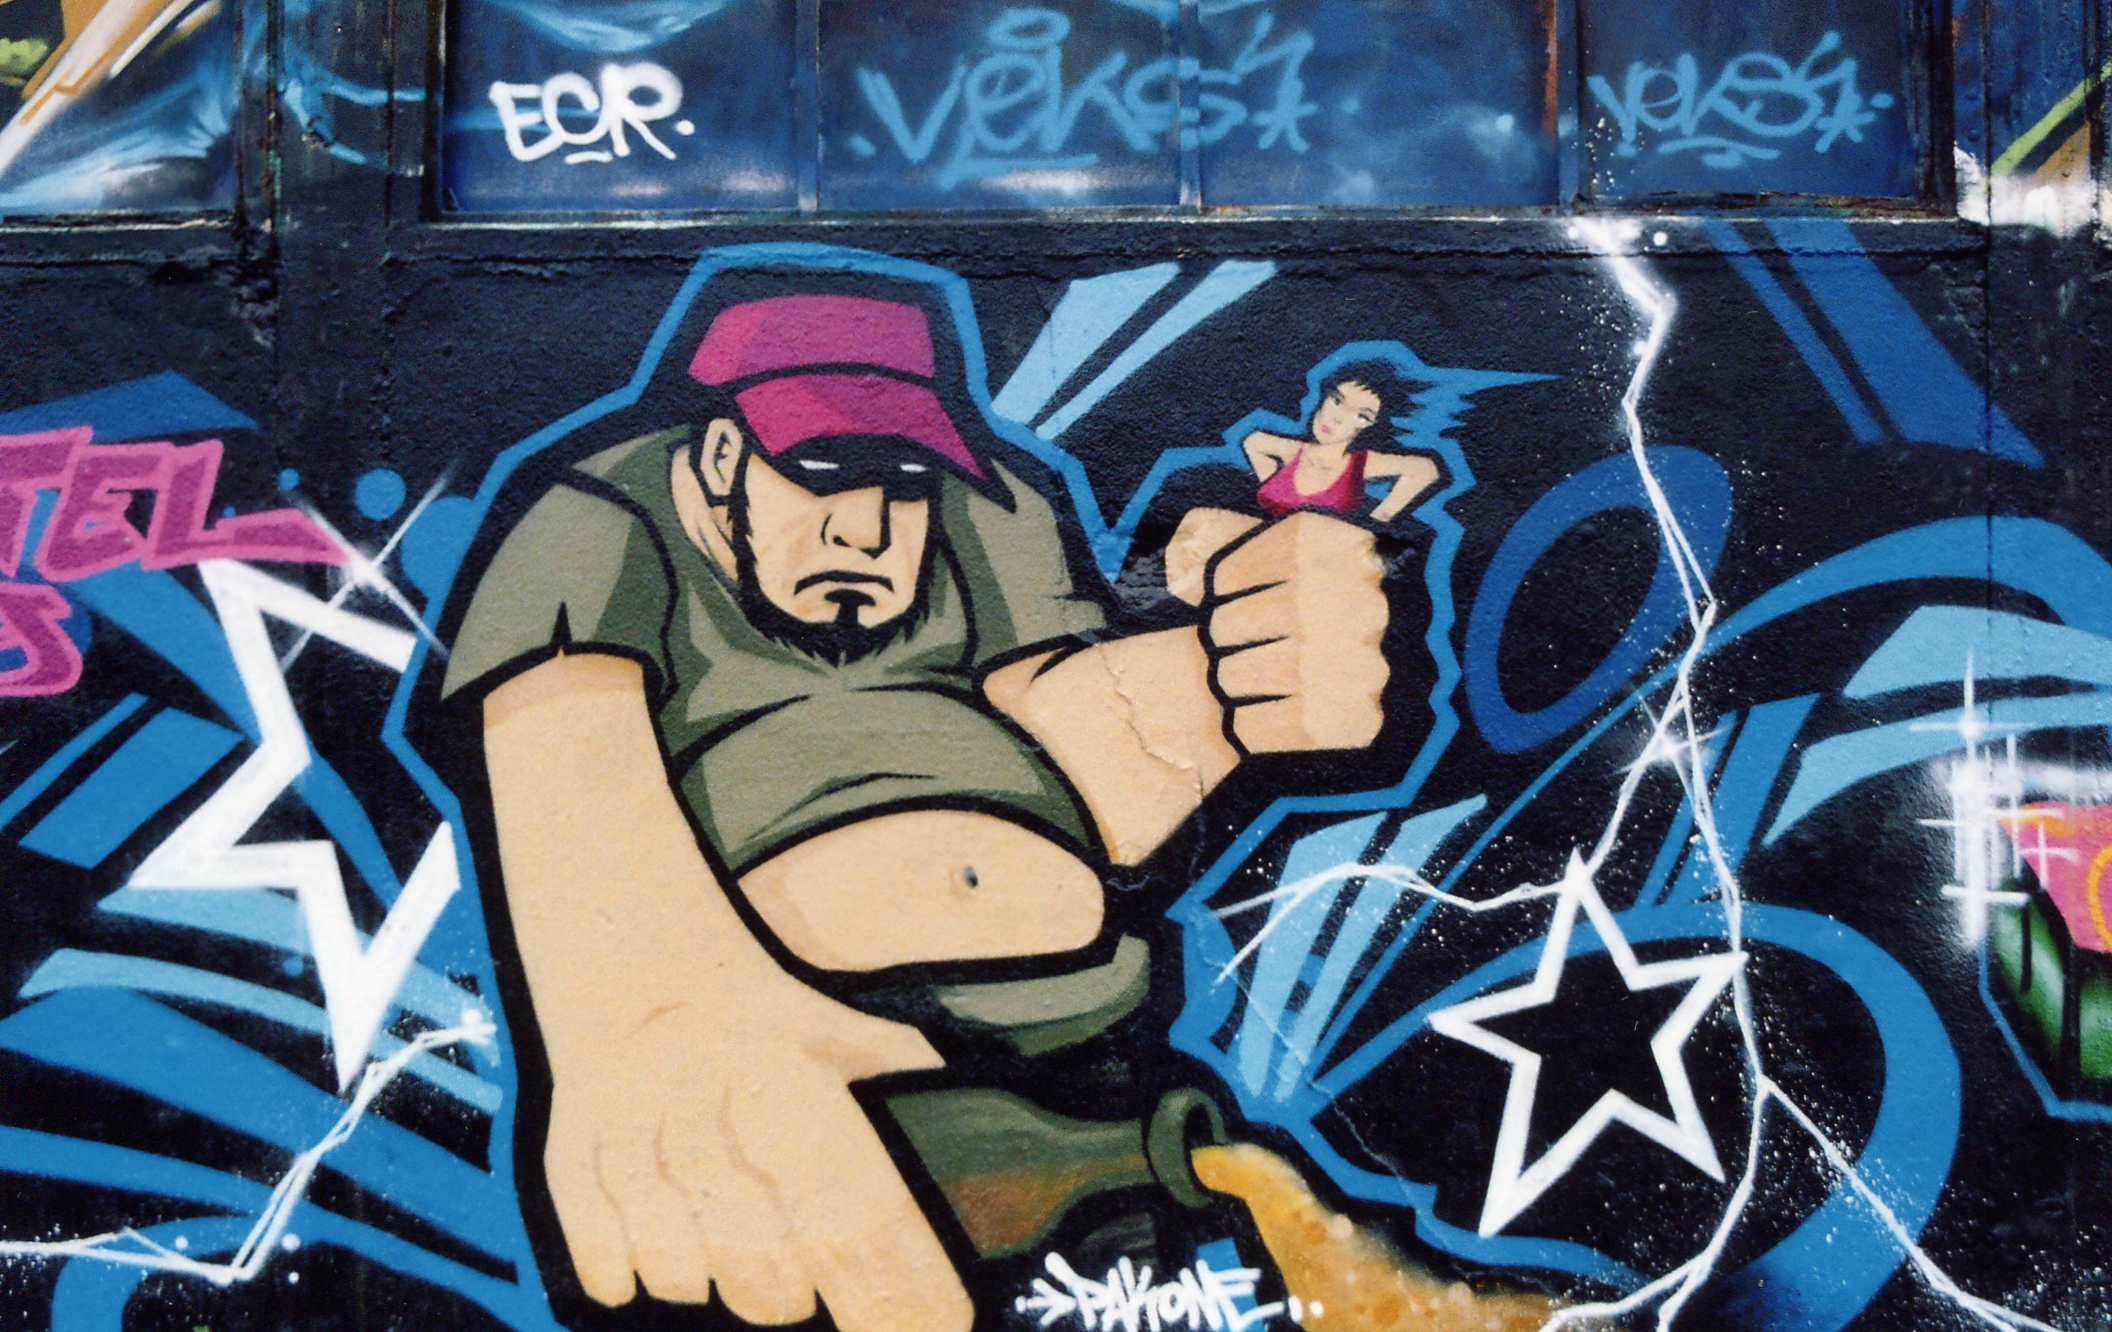 graffiti on the side of a building depicts a man in the middle of a fist bump